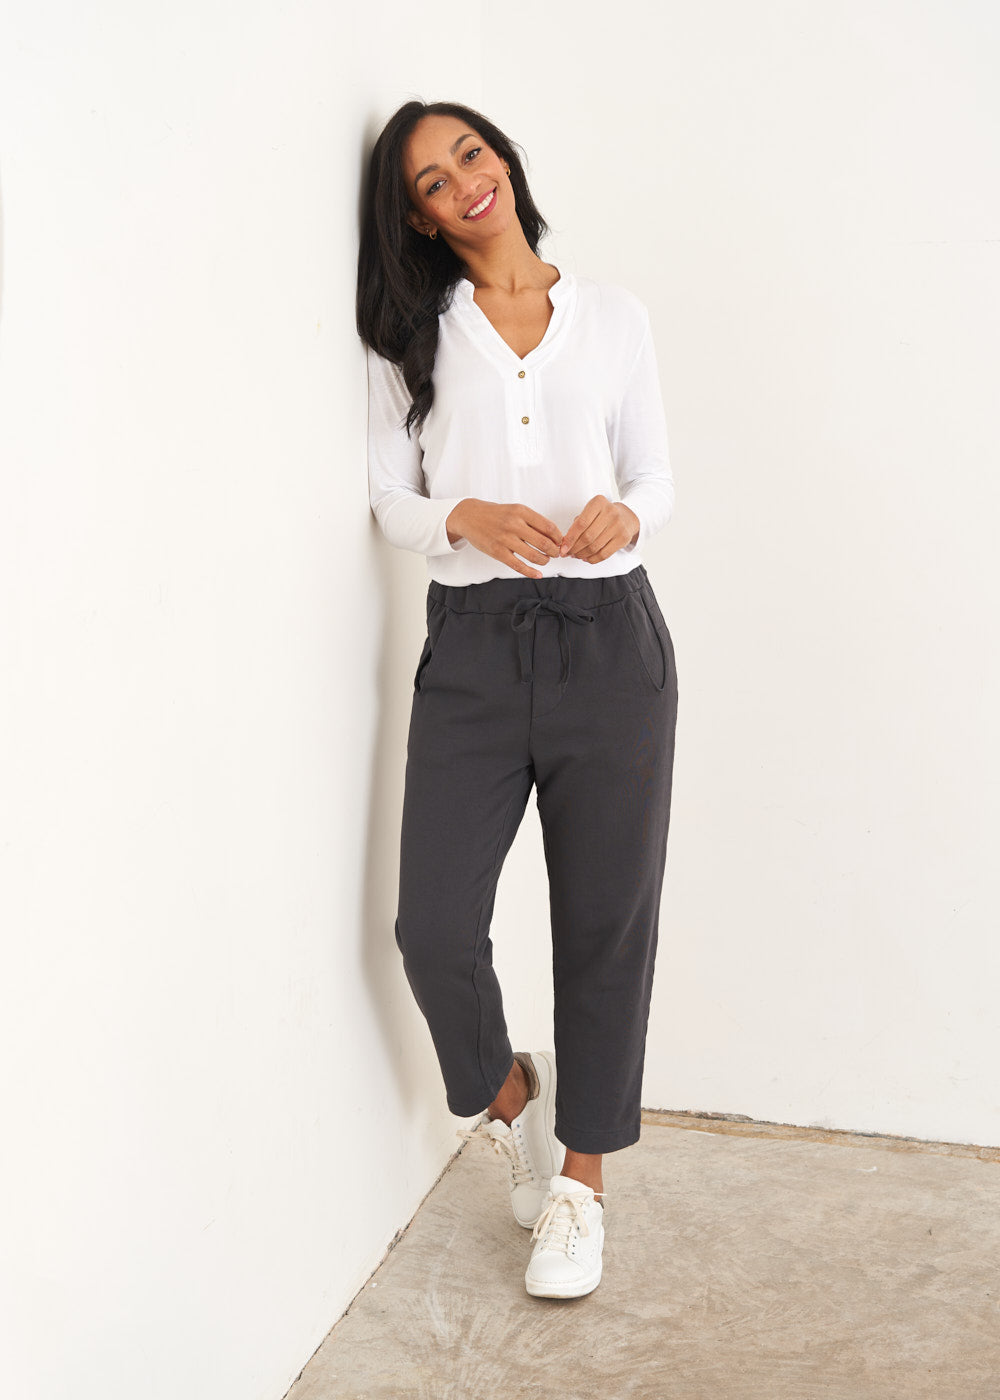 An Independent Women's Clothing Brand – BUSBY & FOX